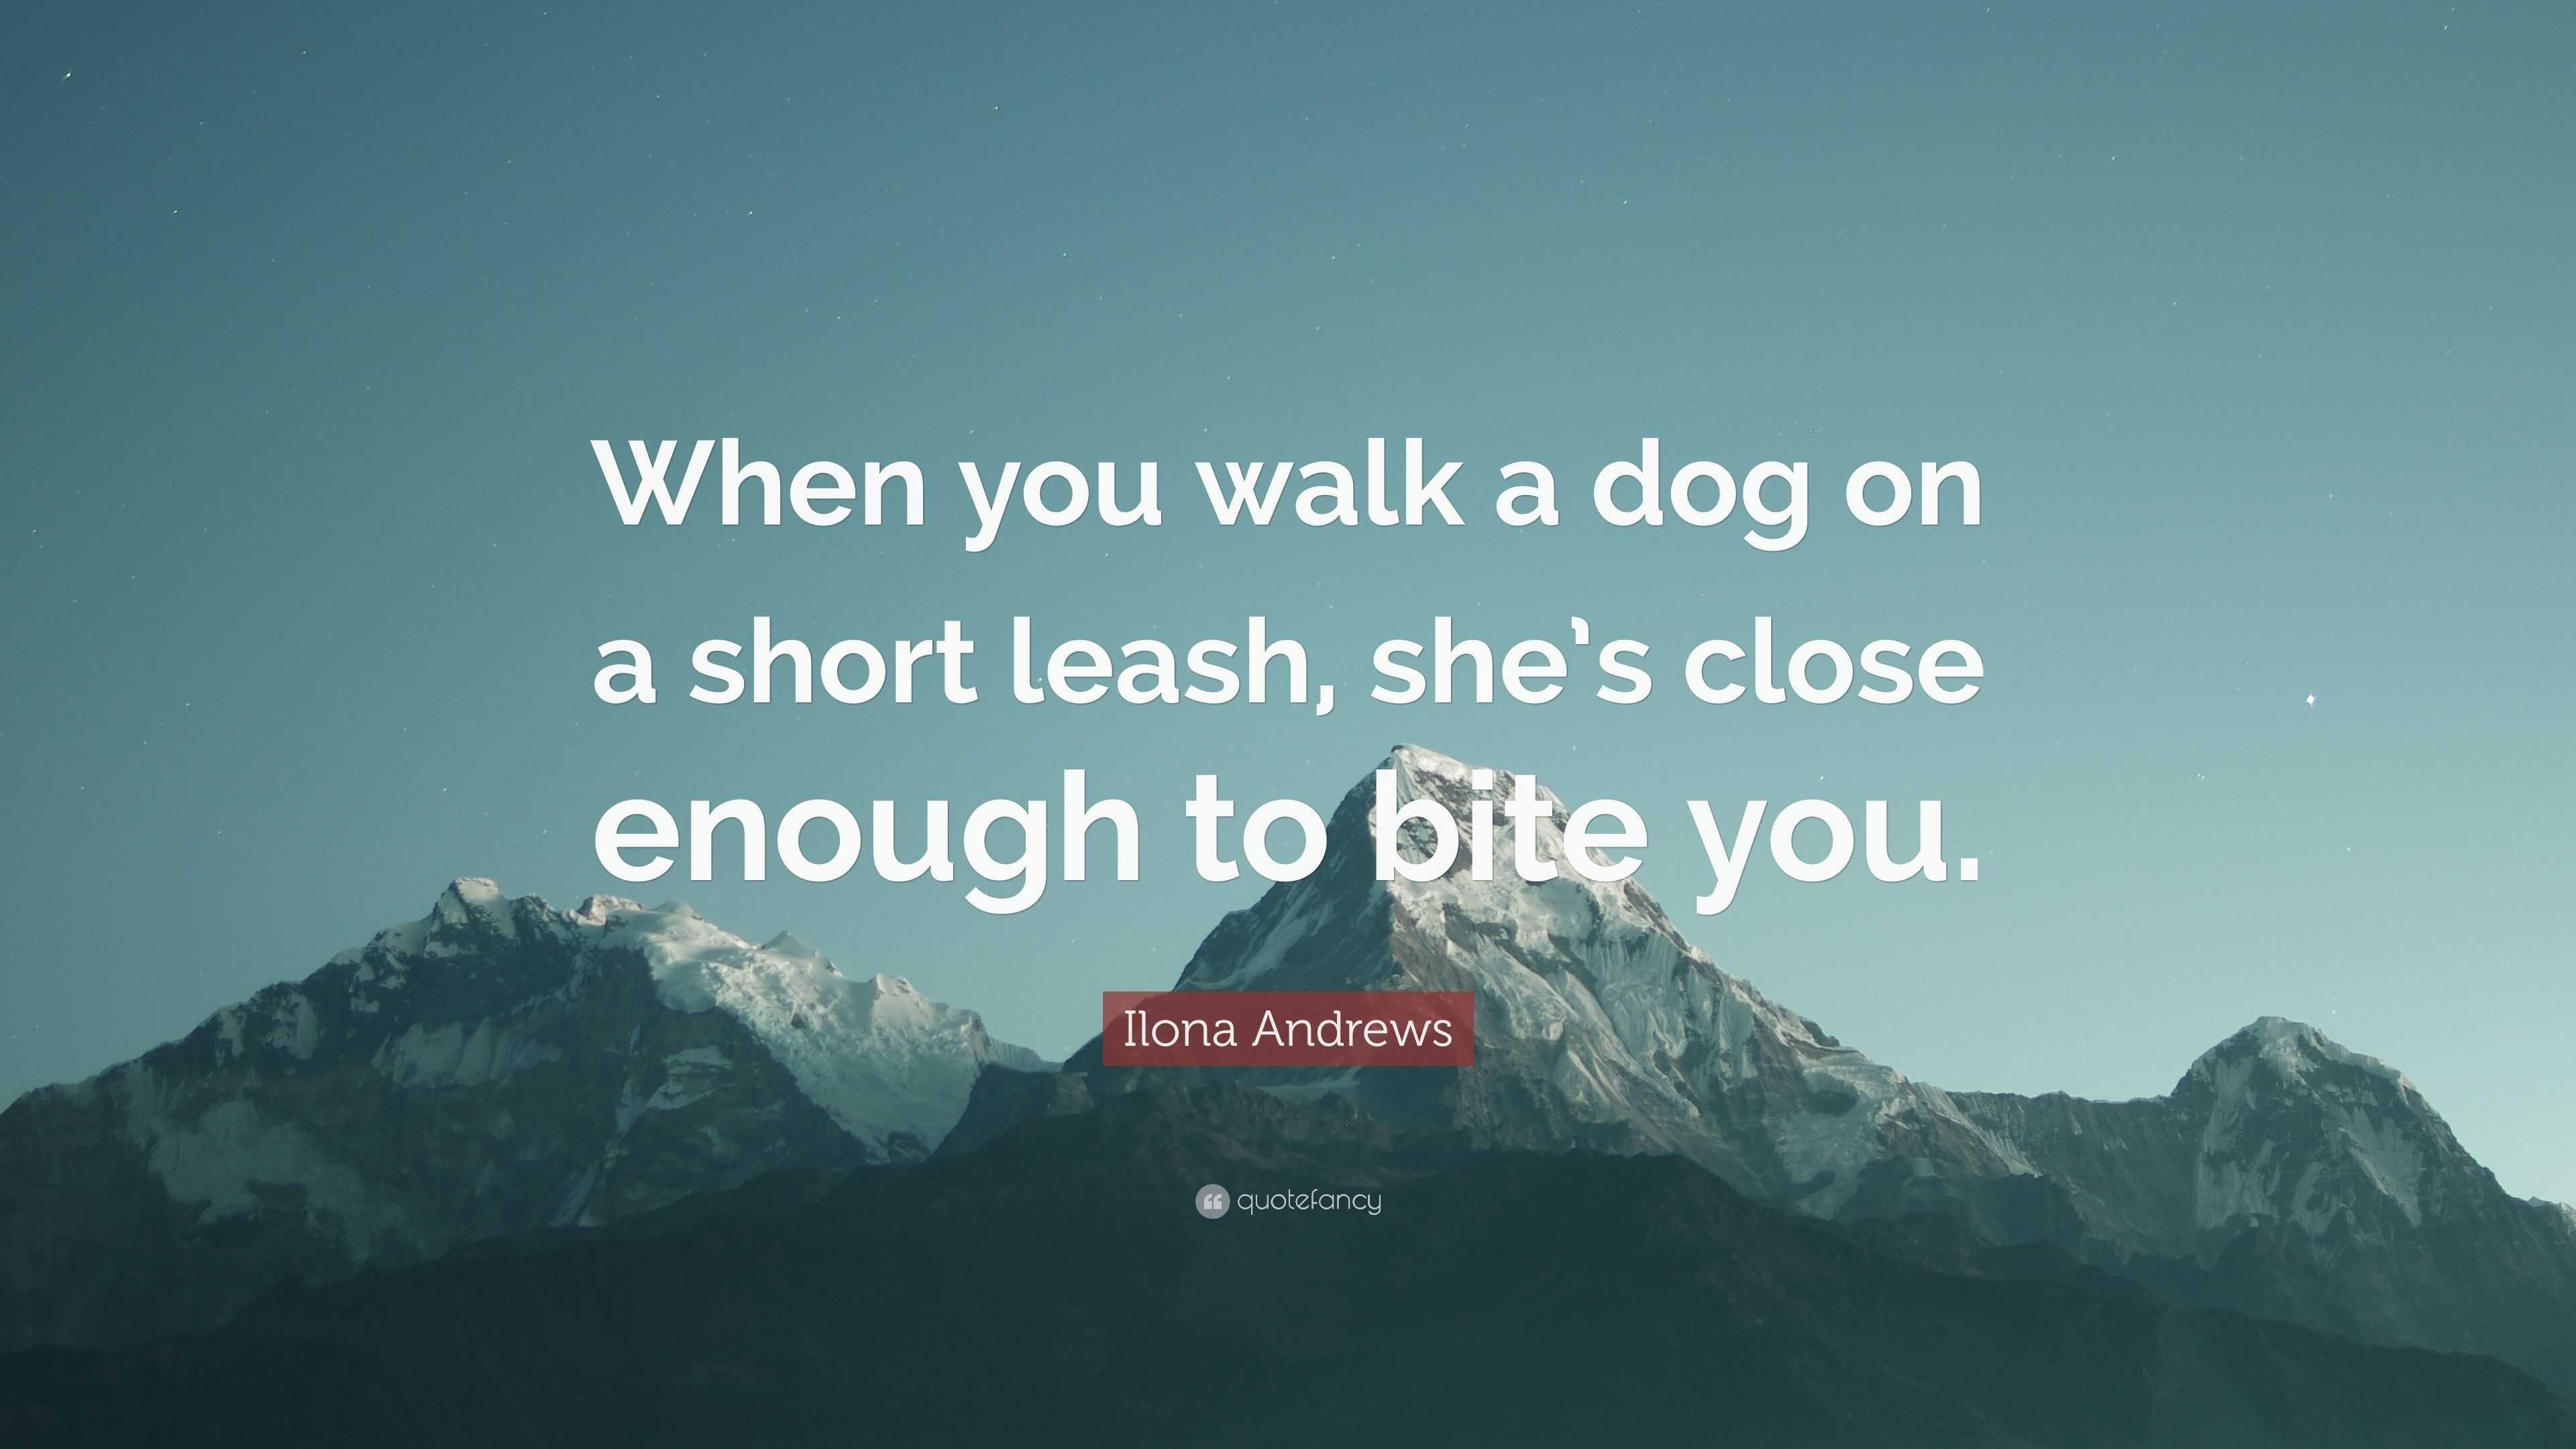 Ilona Andrews Quote: “When you walk a dog on a short leash, she’s close ...